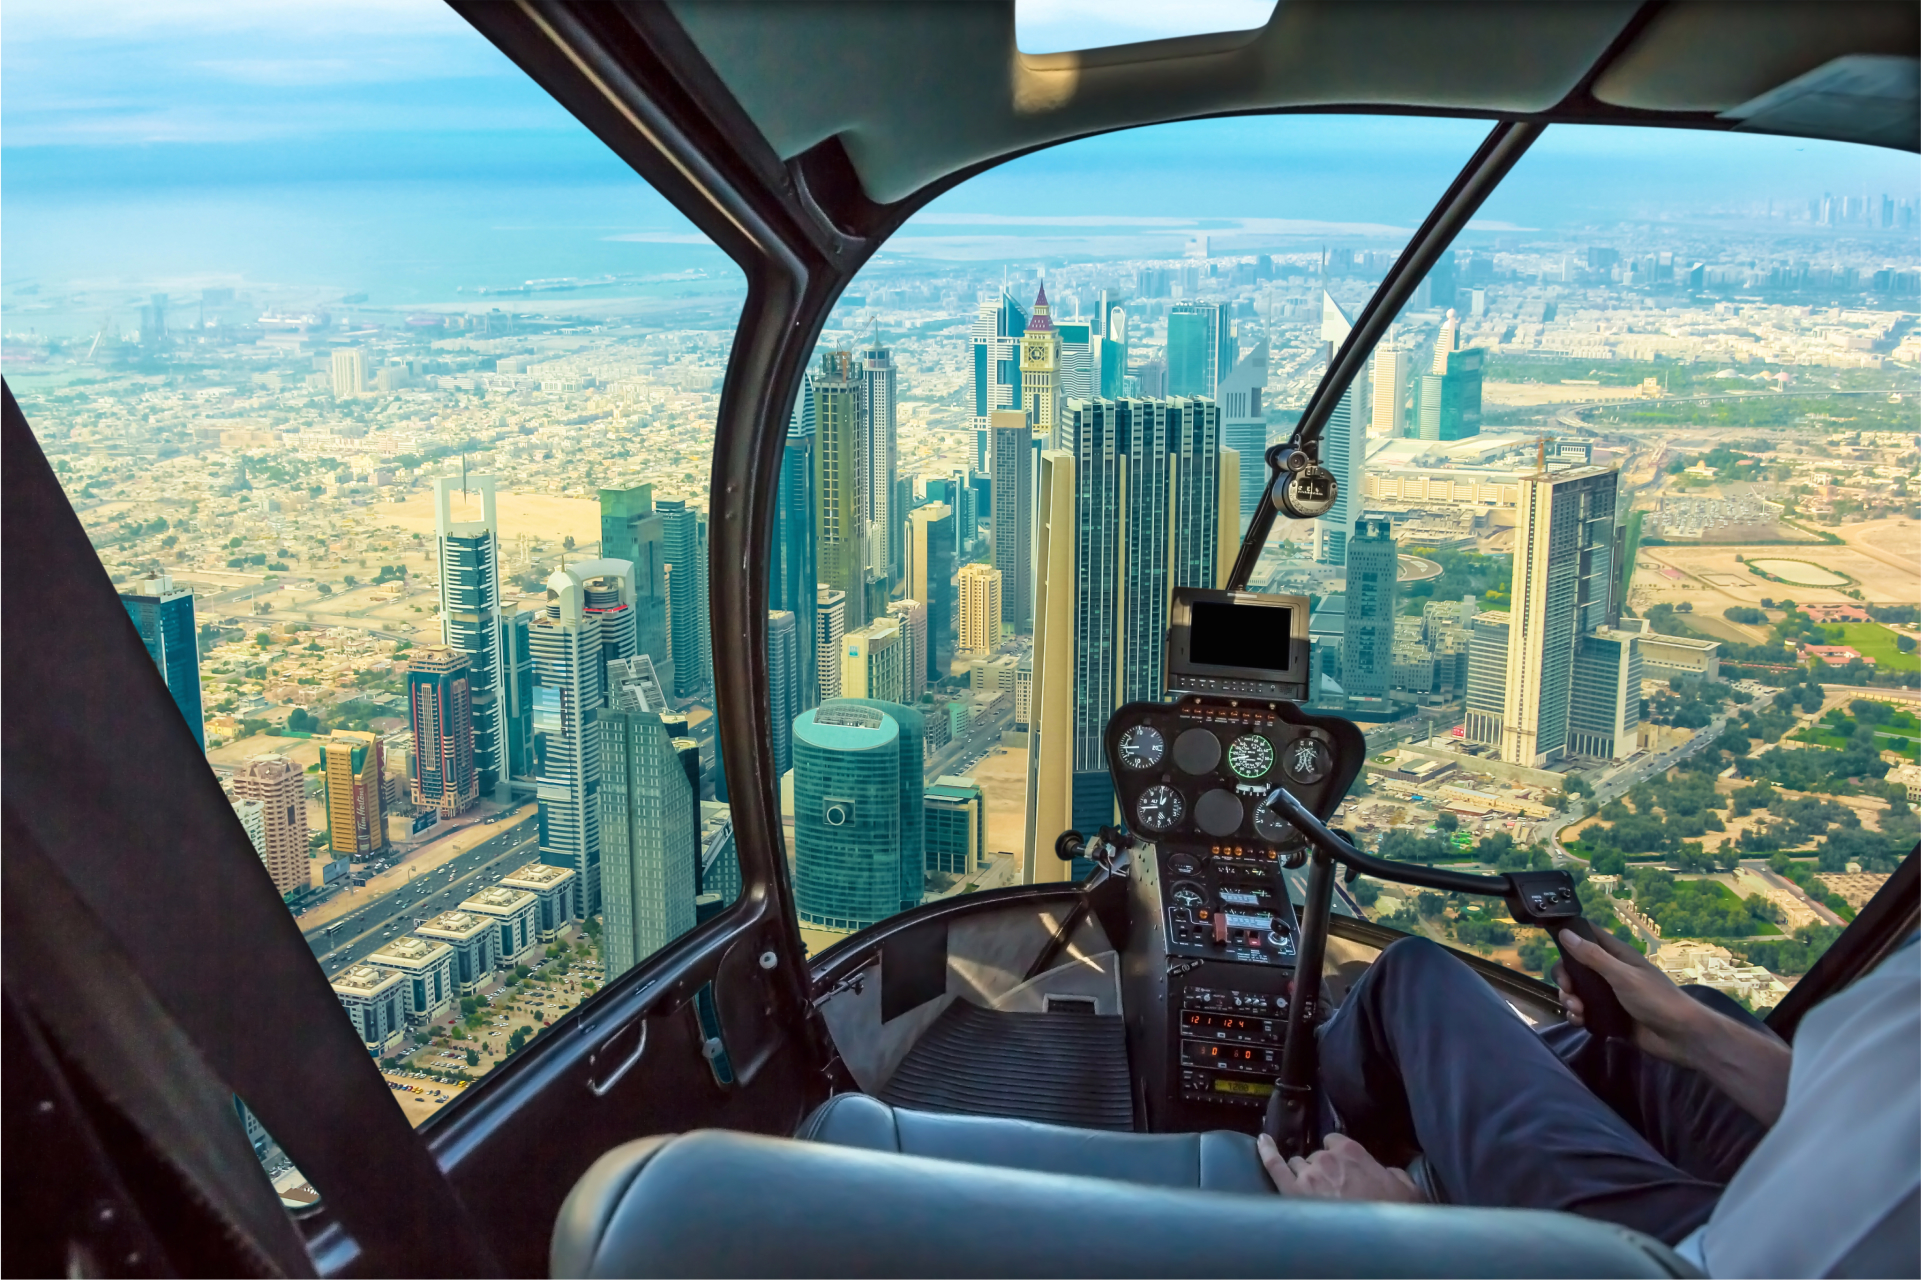 Helicopter view of Dubai